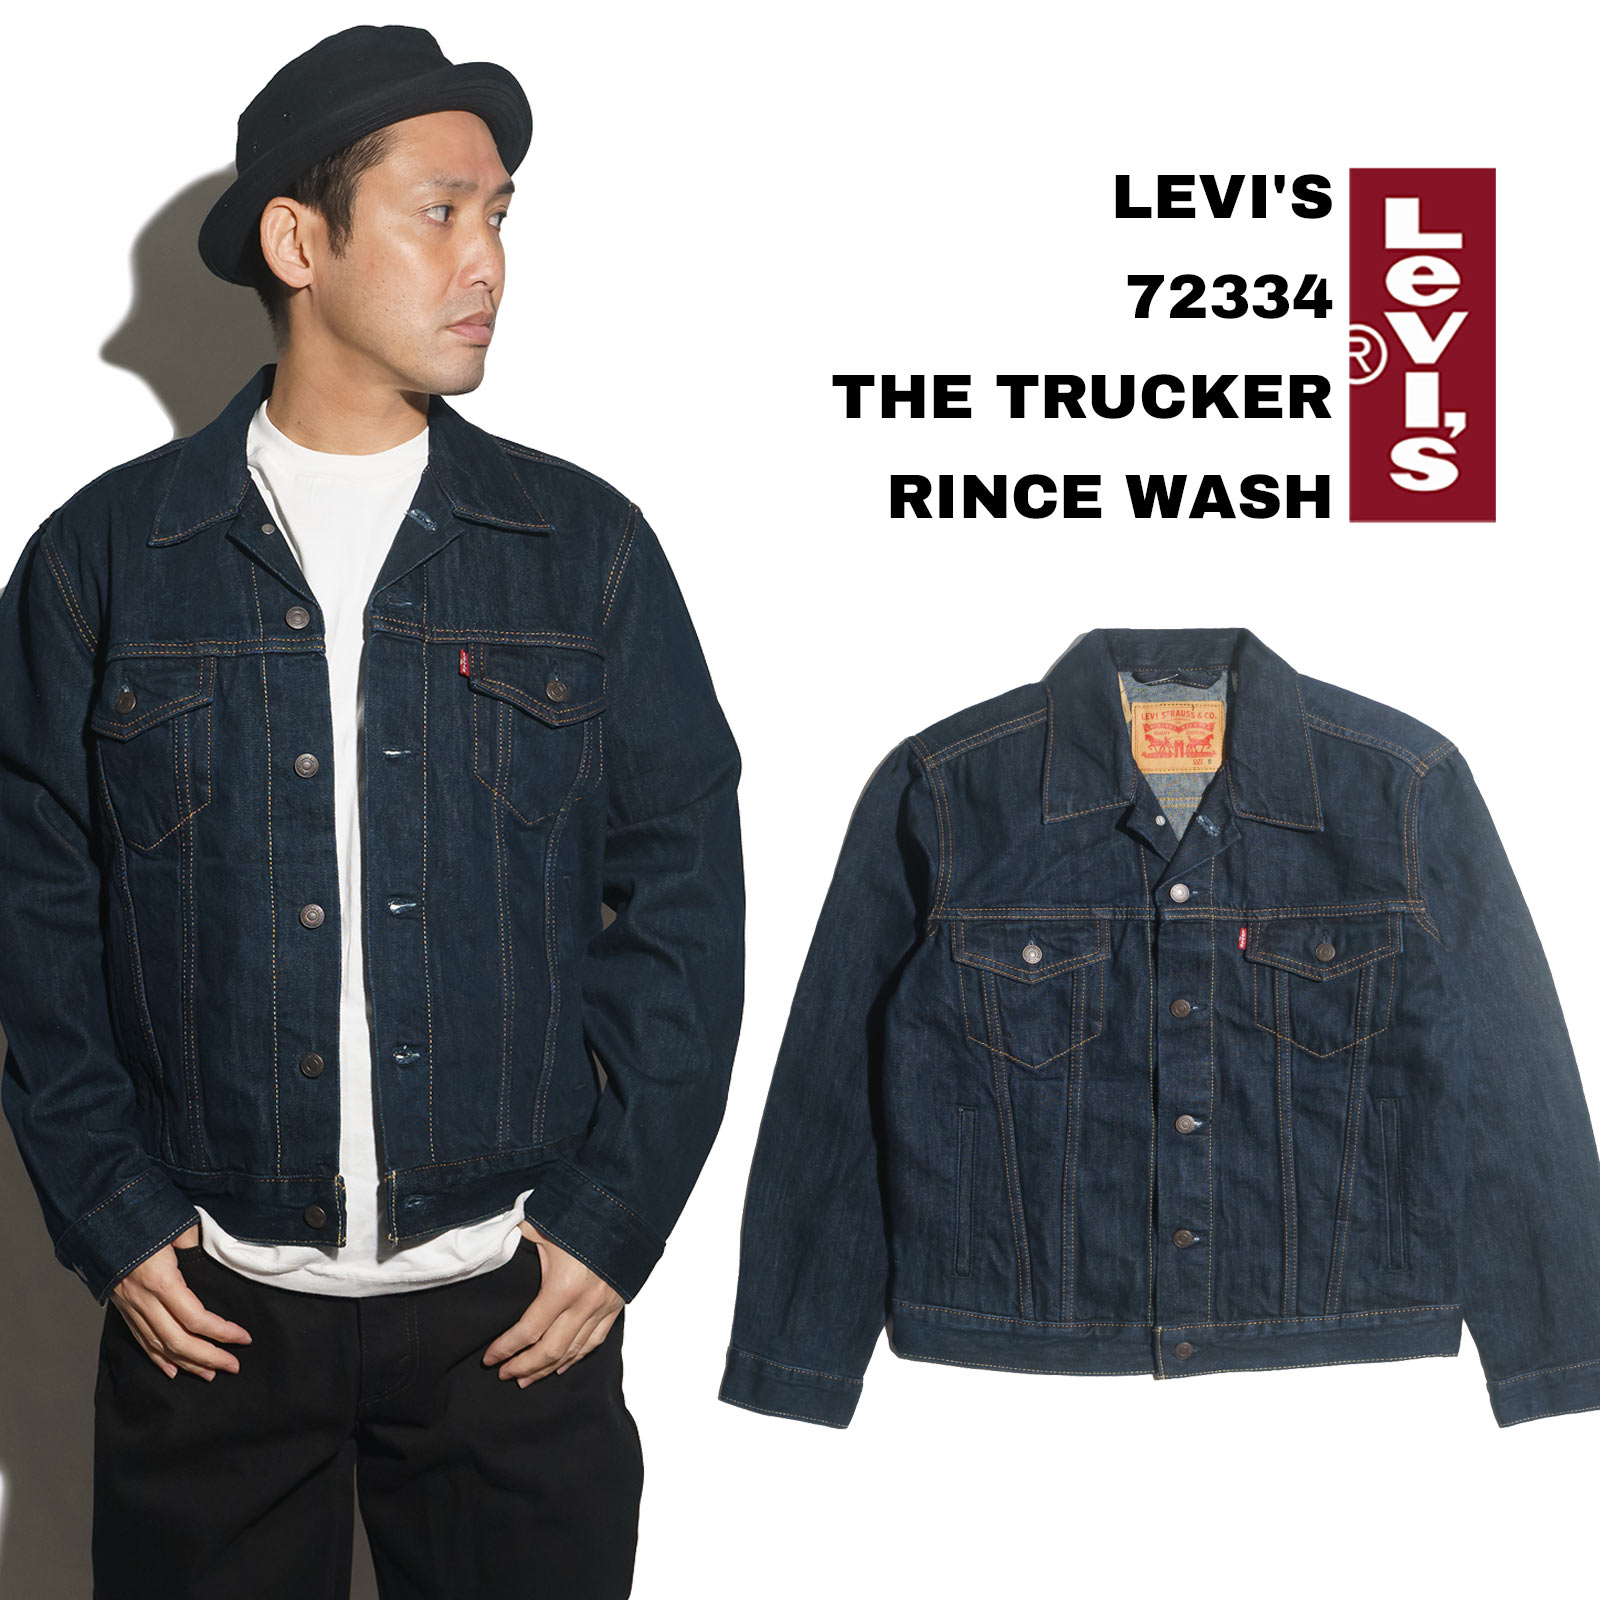 ڥݥۥ꡼Х LEVIS #72334 ǥ˥ॸ㥱å ȥå (㥱å THE TRUCKER 3RD  G RINCE